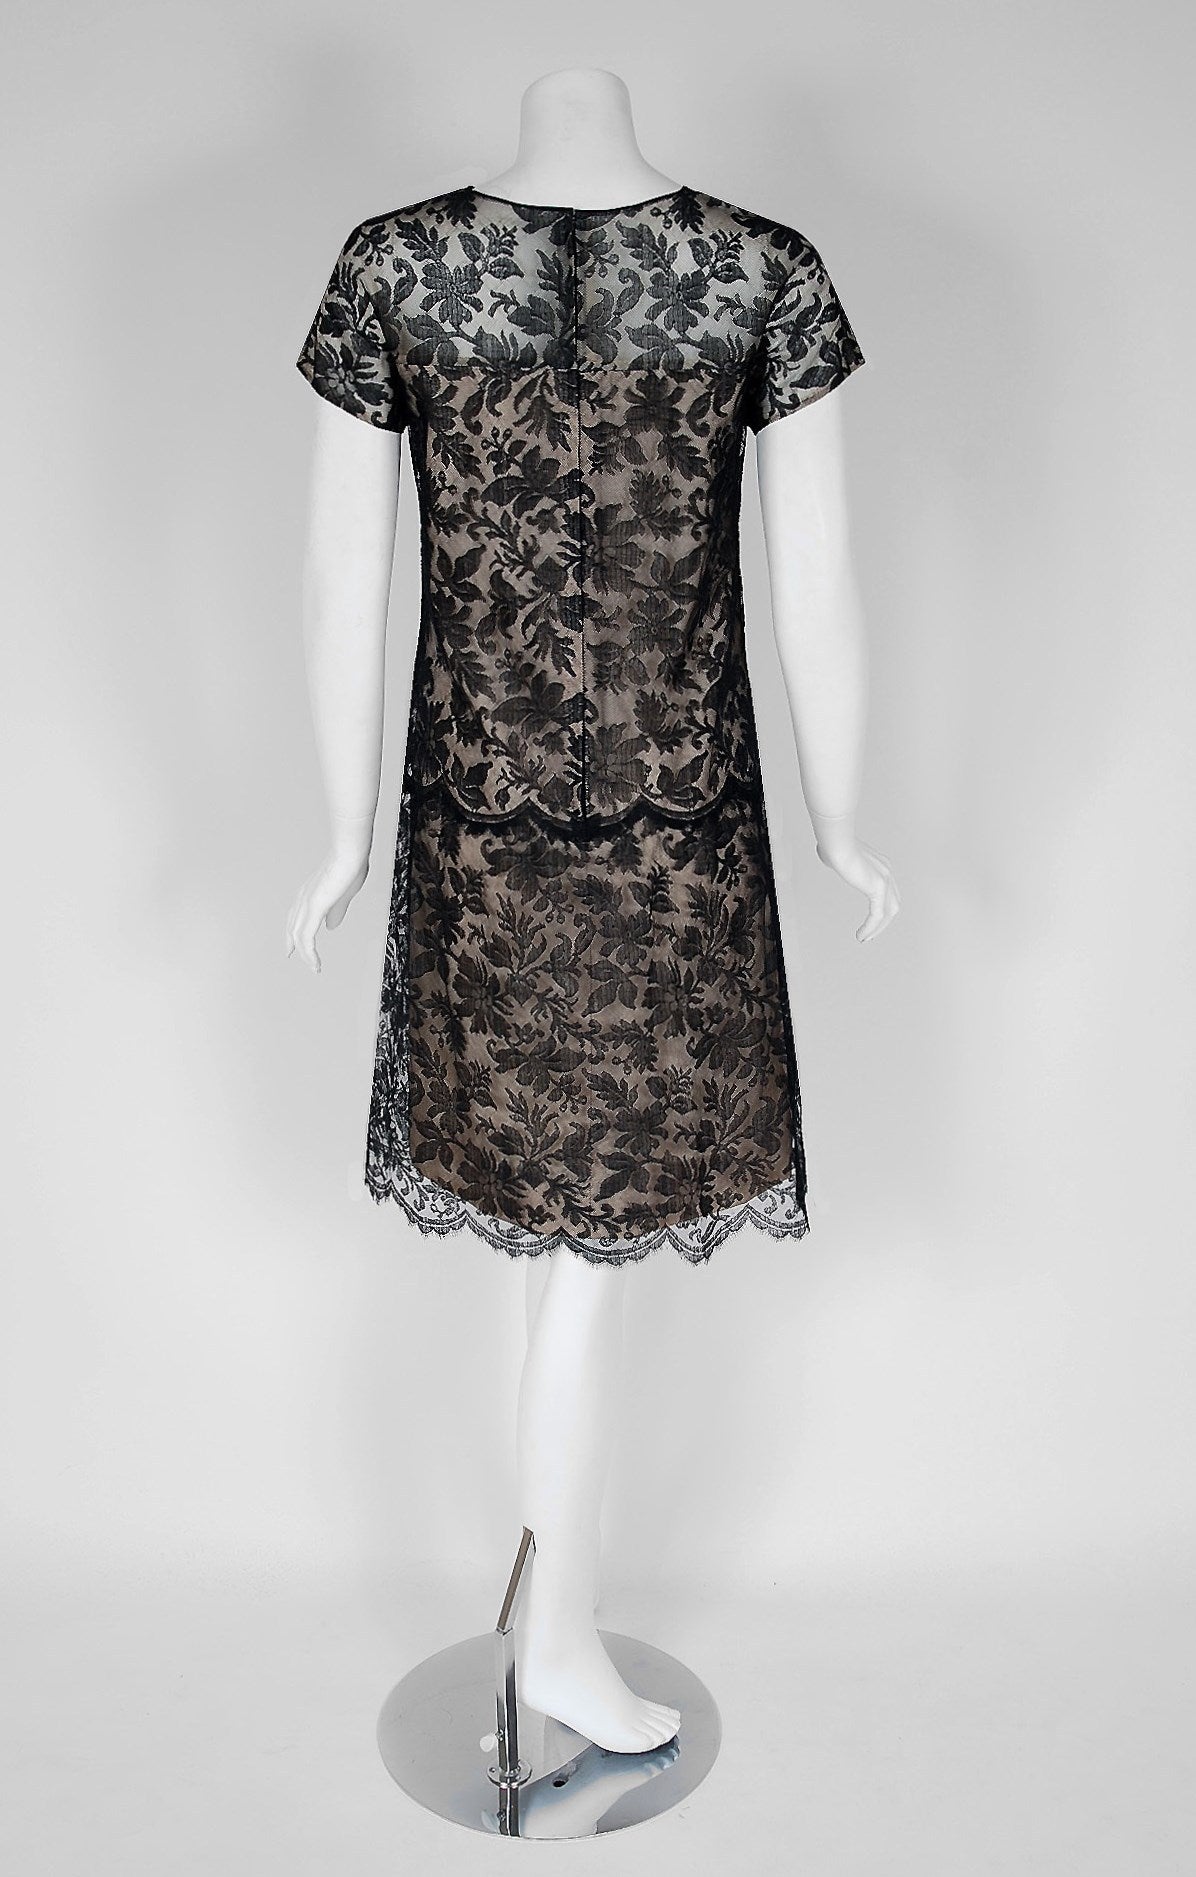 Women's 1968 Givenchy Haute-Couture Black Chantilly Lace Illusion Scalloped Mod Dress